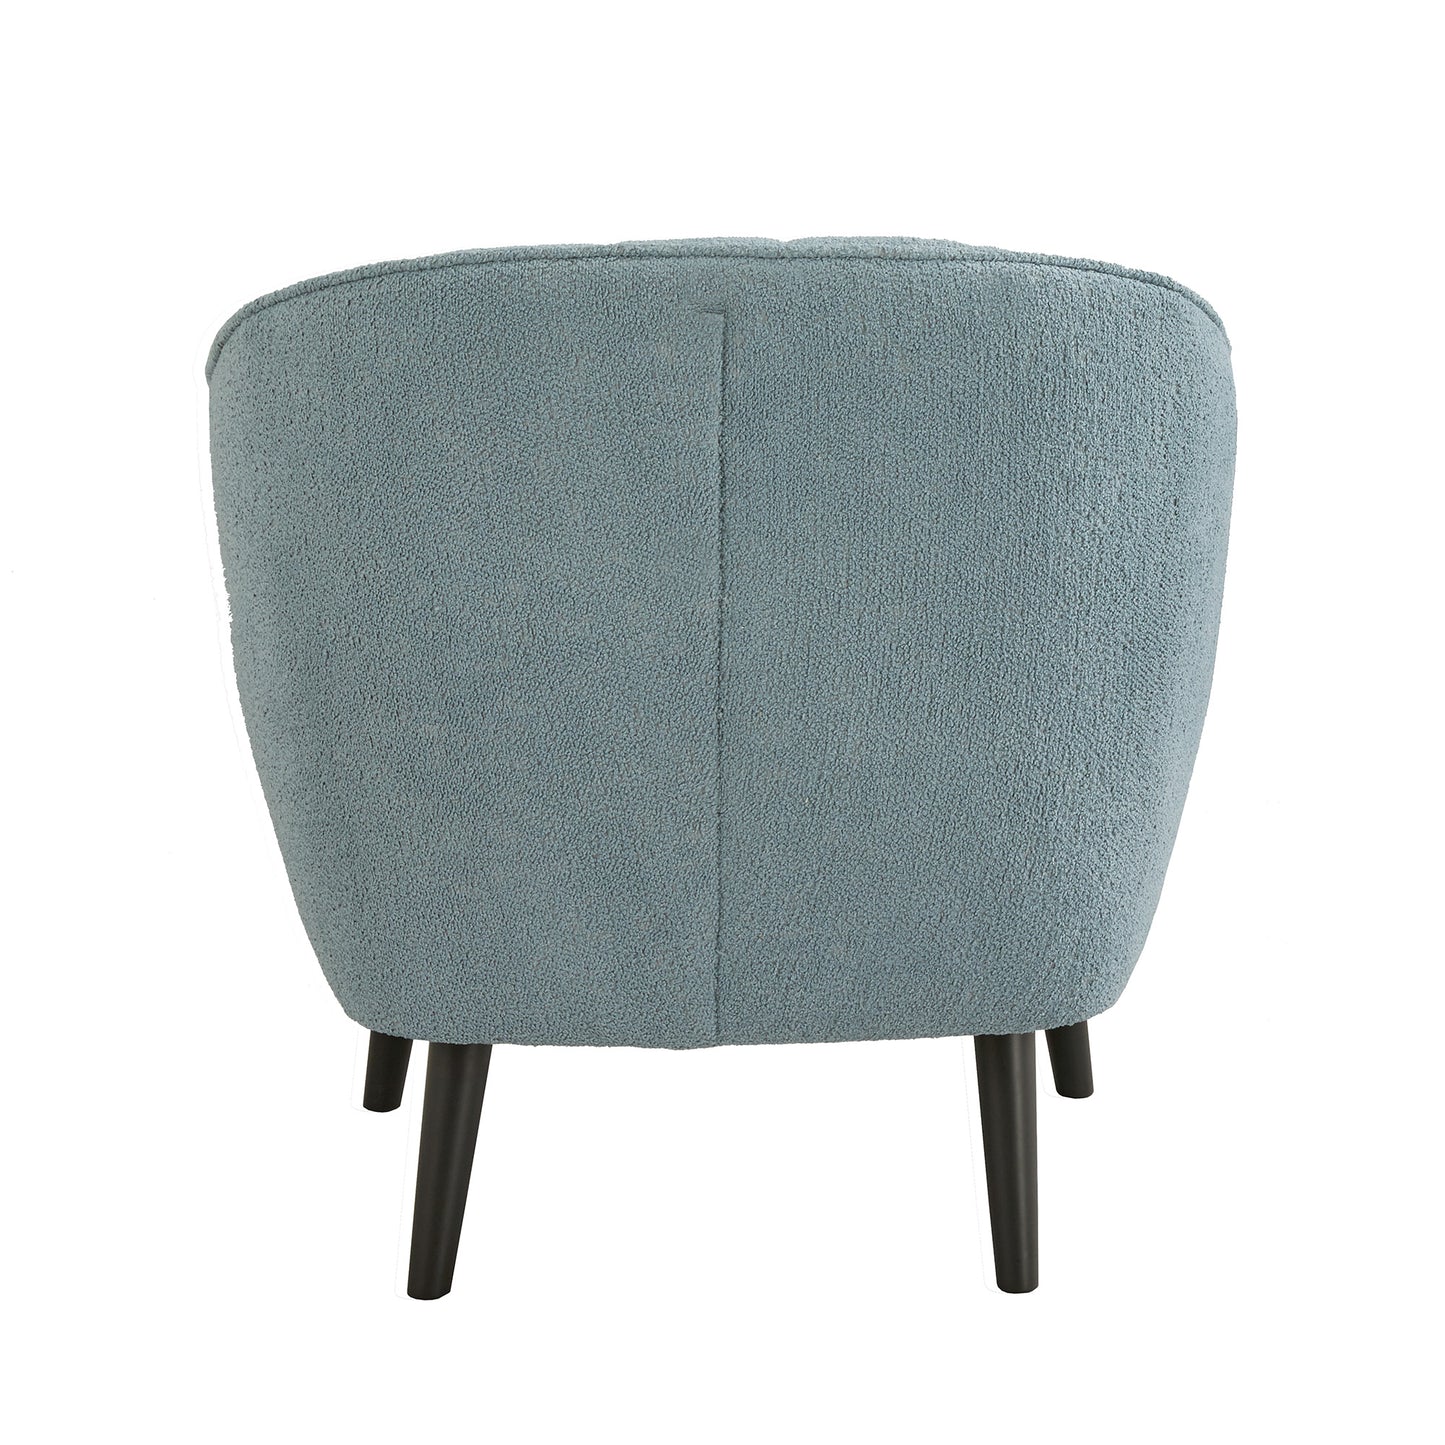 Mid-Century Modern Channel-Tufted Accent Chair with Removable Cushion Cover - Blue